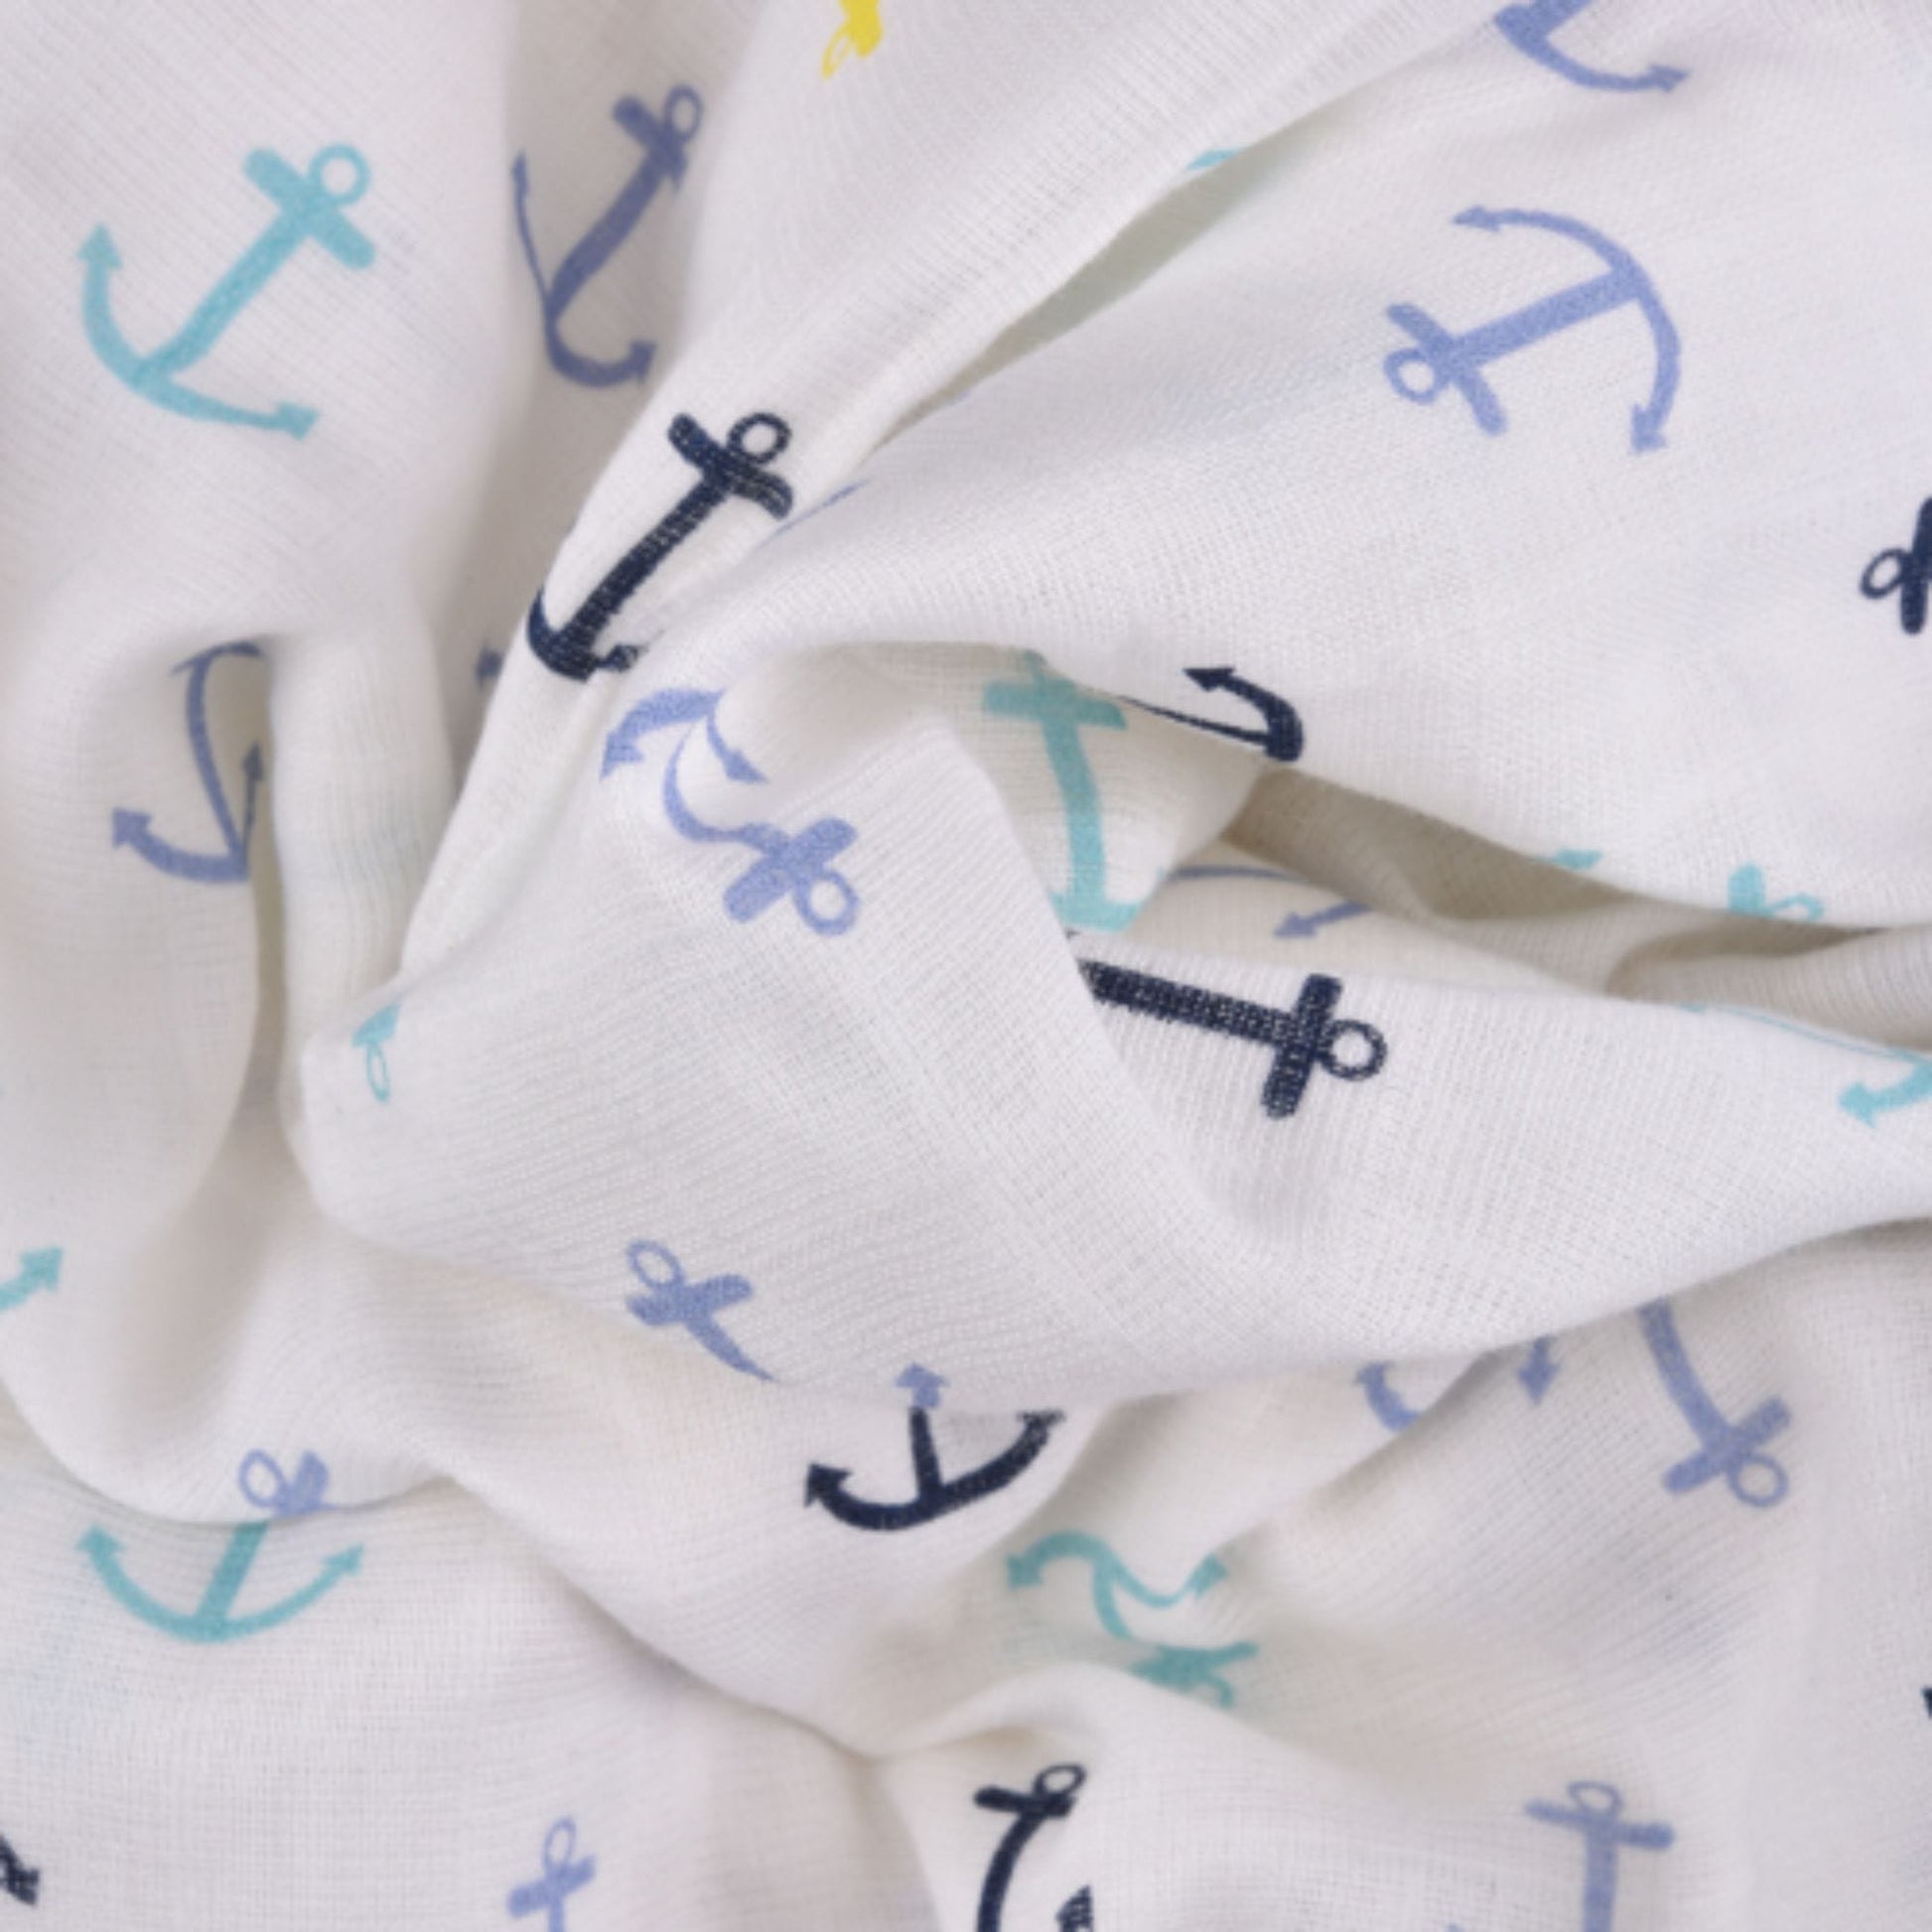 Chevron Stripes 100% Cotton Muslin Swaddle Pack Of 5 (Navy, Star Navy, Dots, Anchor, Horse) 100 x 100 CM - haus & kinder